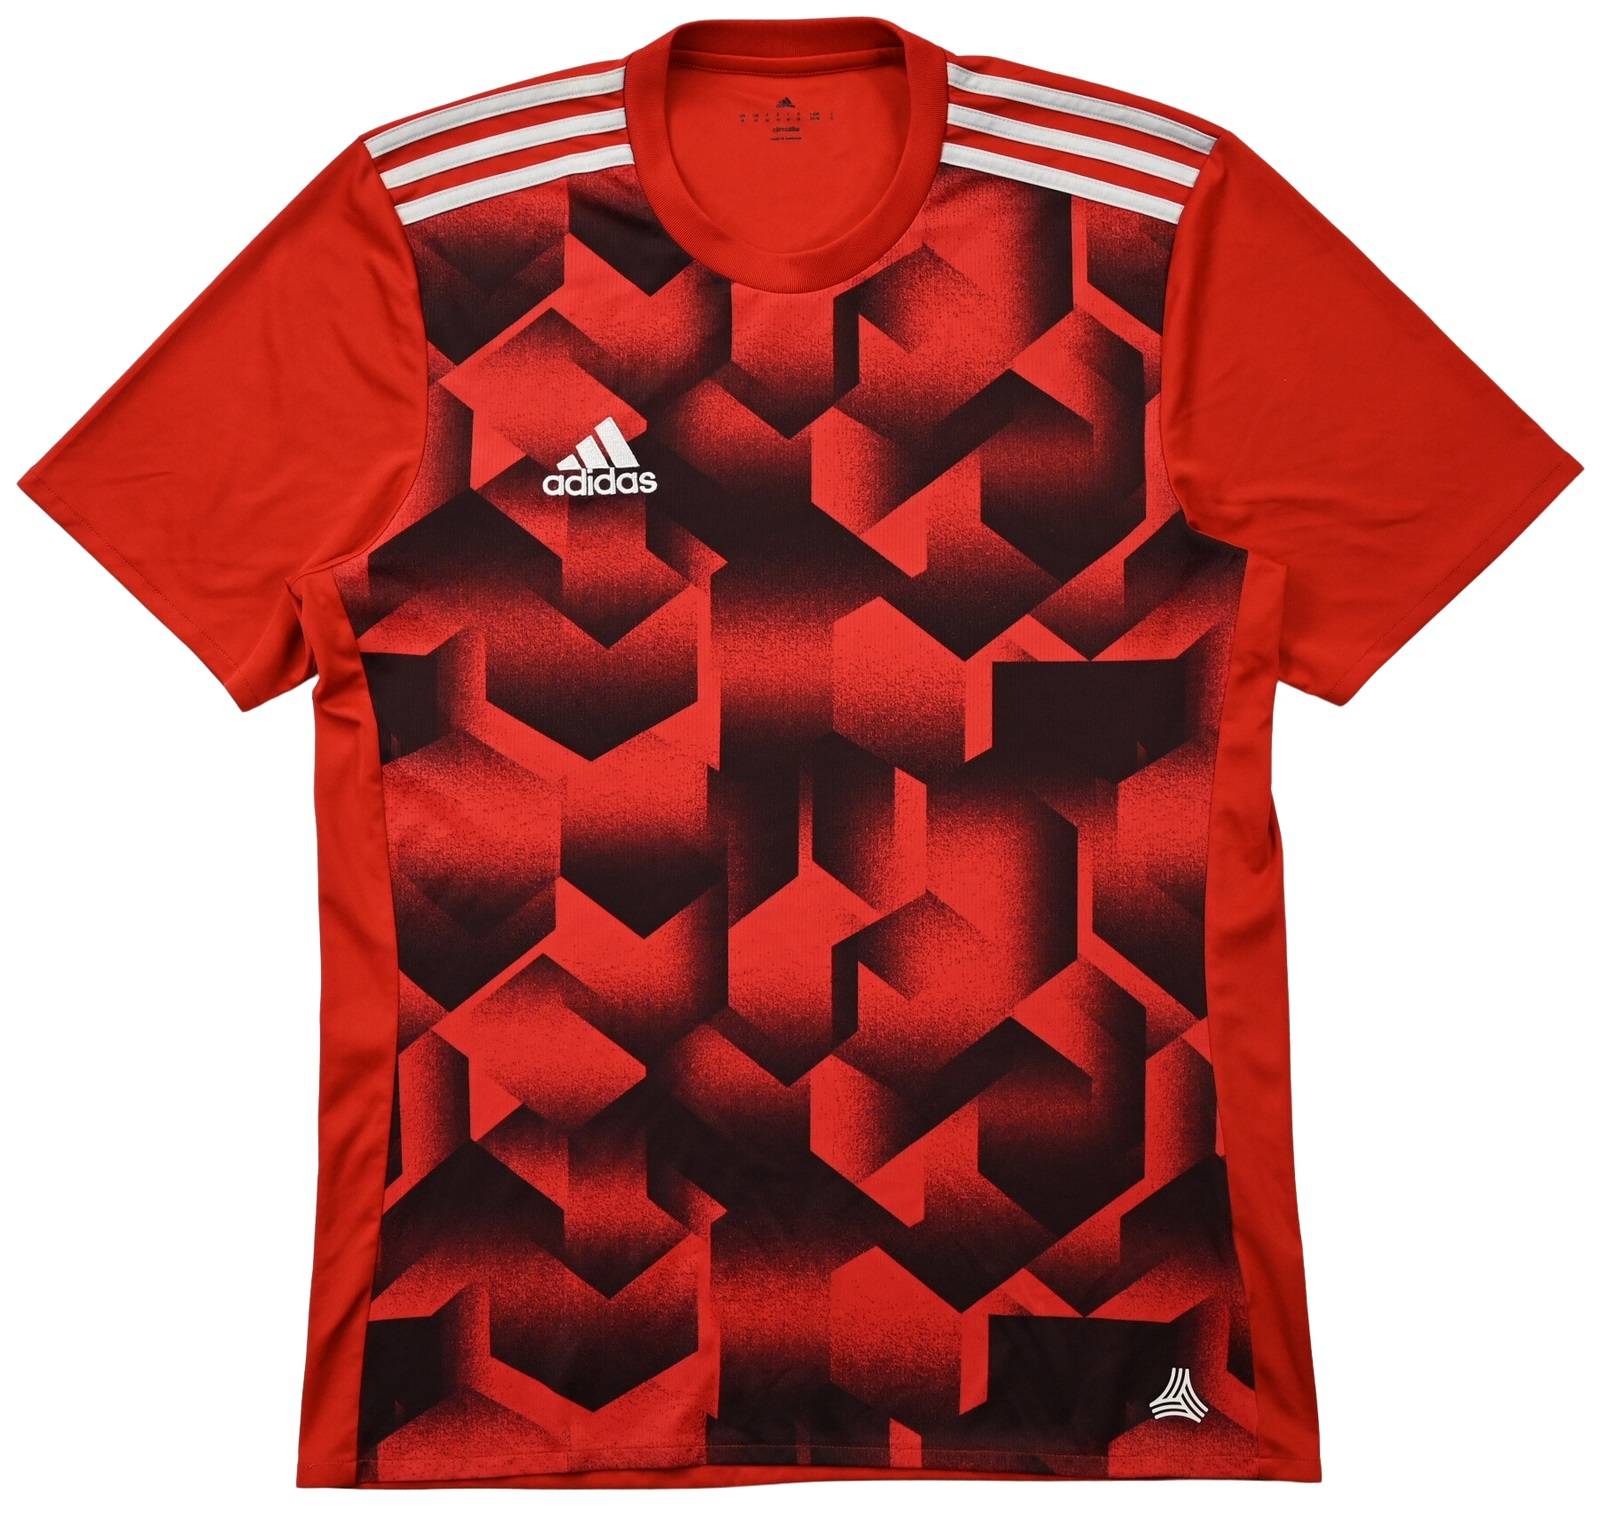 ADIDAS TRAINING SHIRT M Other \ Other Sports | Classic-Shirts.com